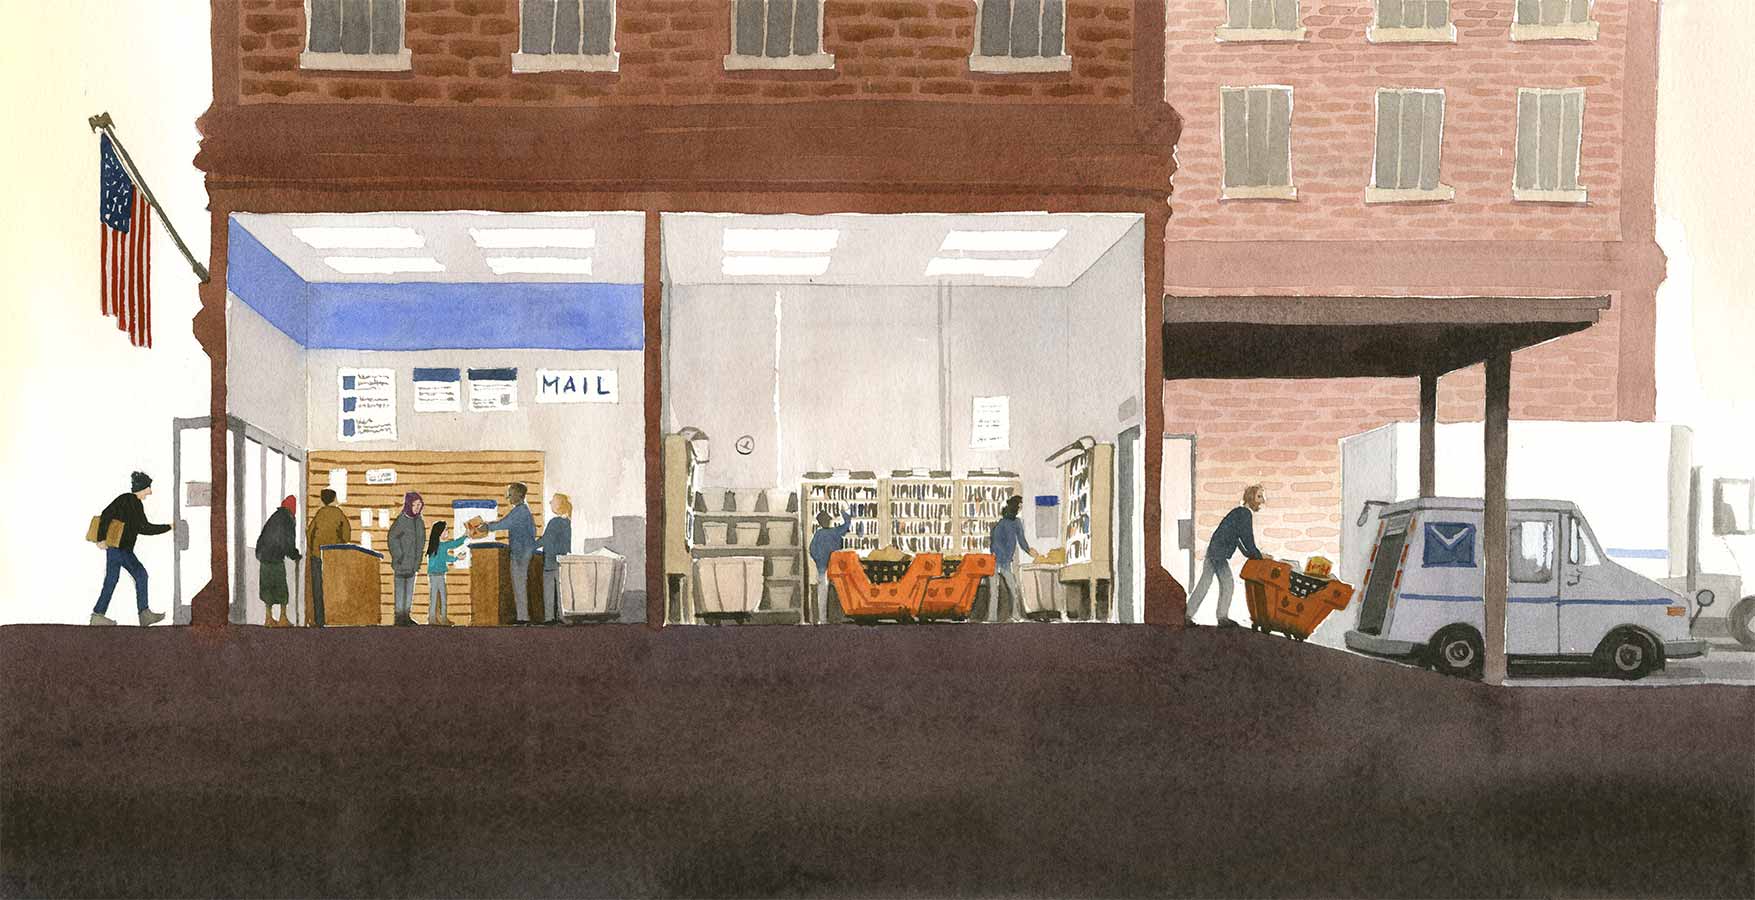 Watercolor illustration by Jessica Lanan from 'The Lost Package' Showing a cross-section of a post office with customers waiting to send packages, a mailroom where packages are sorted, and a loading area with mail trucks.